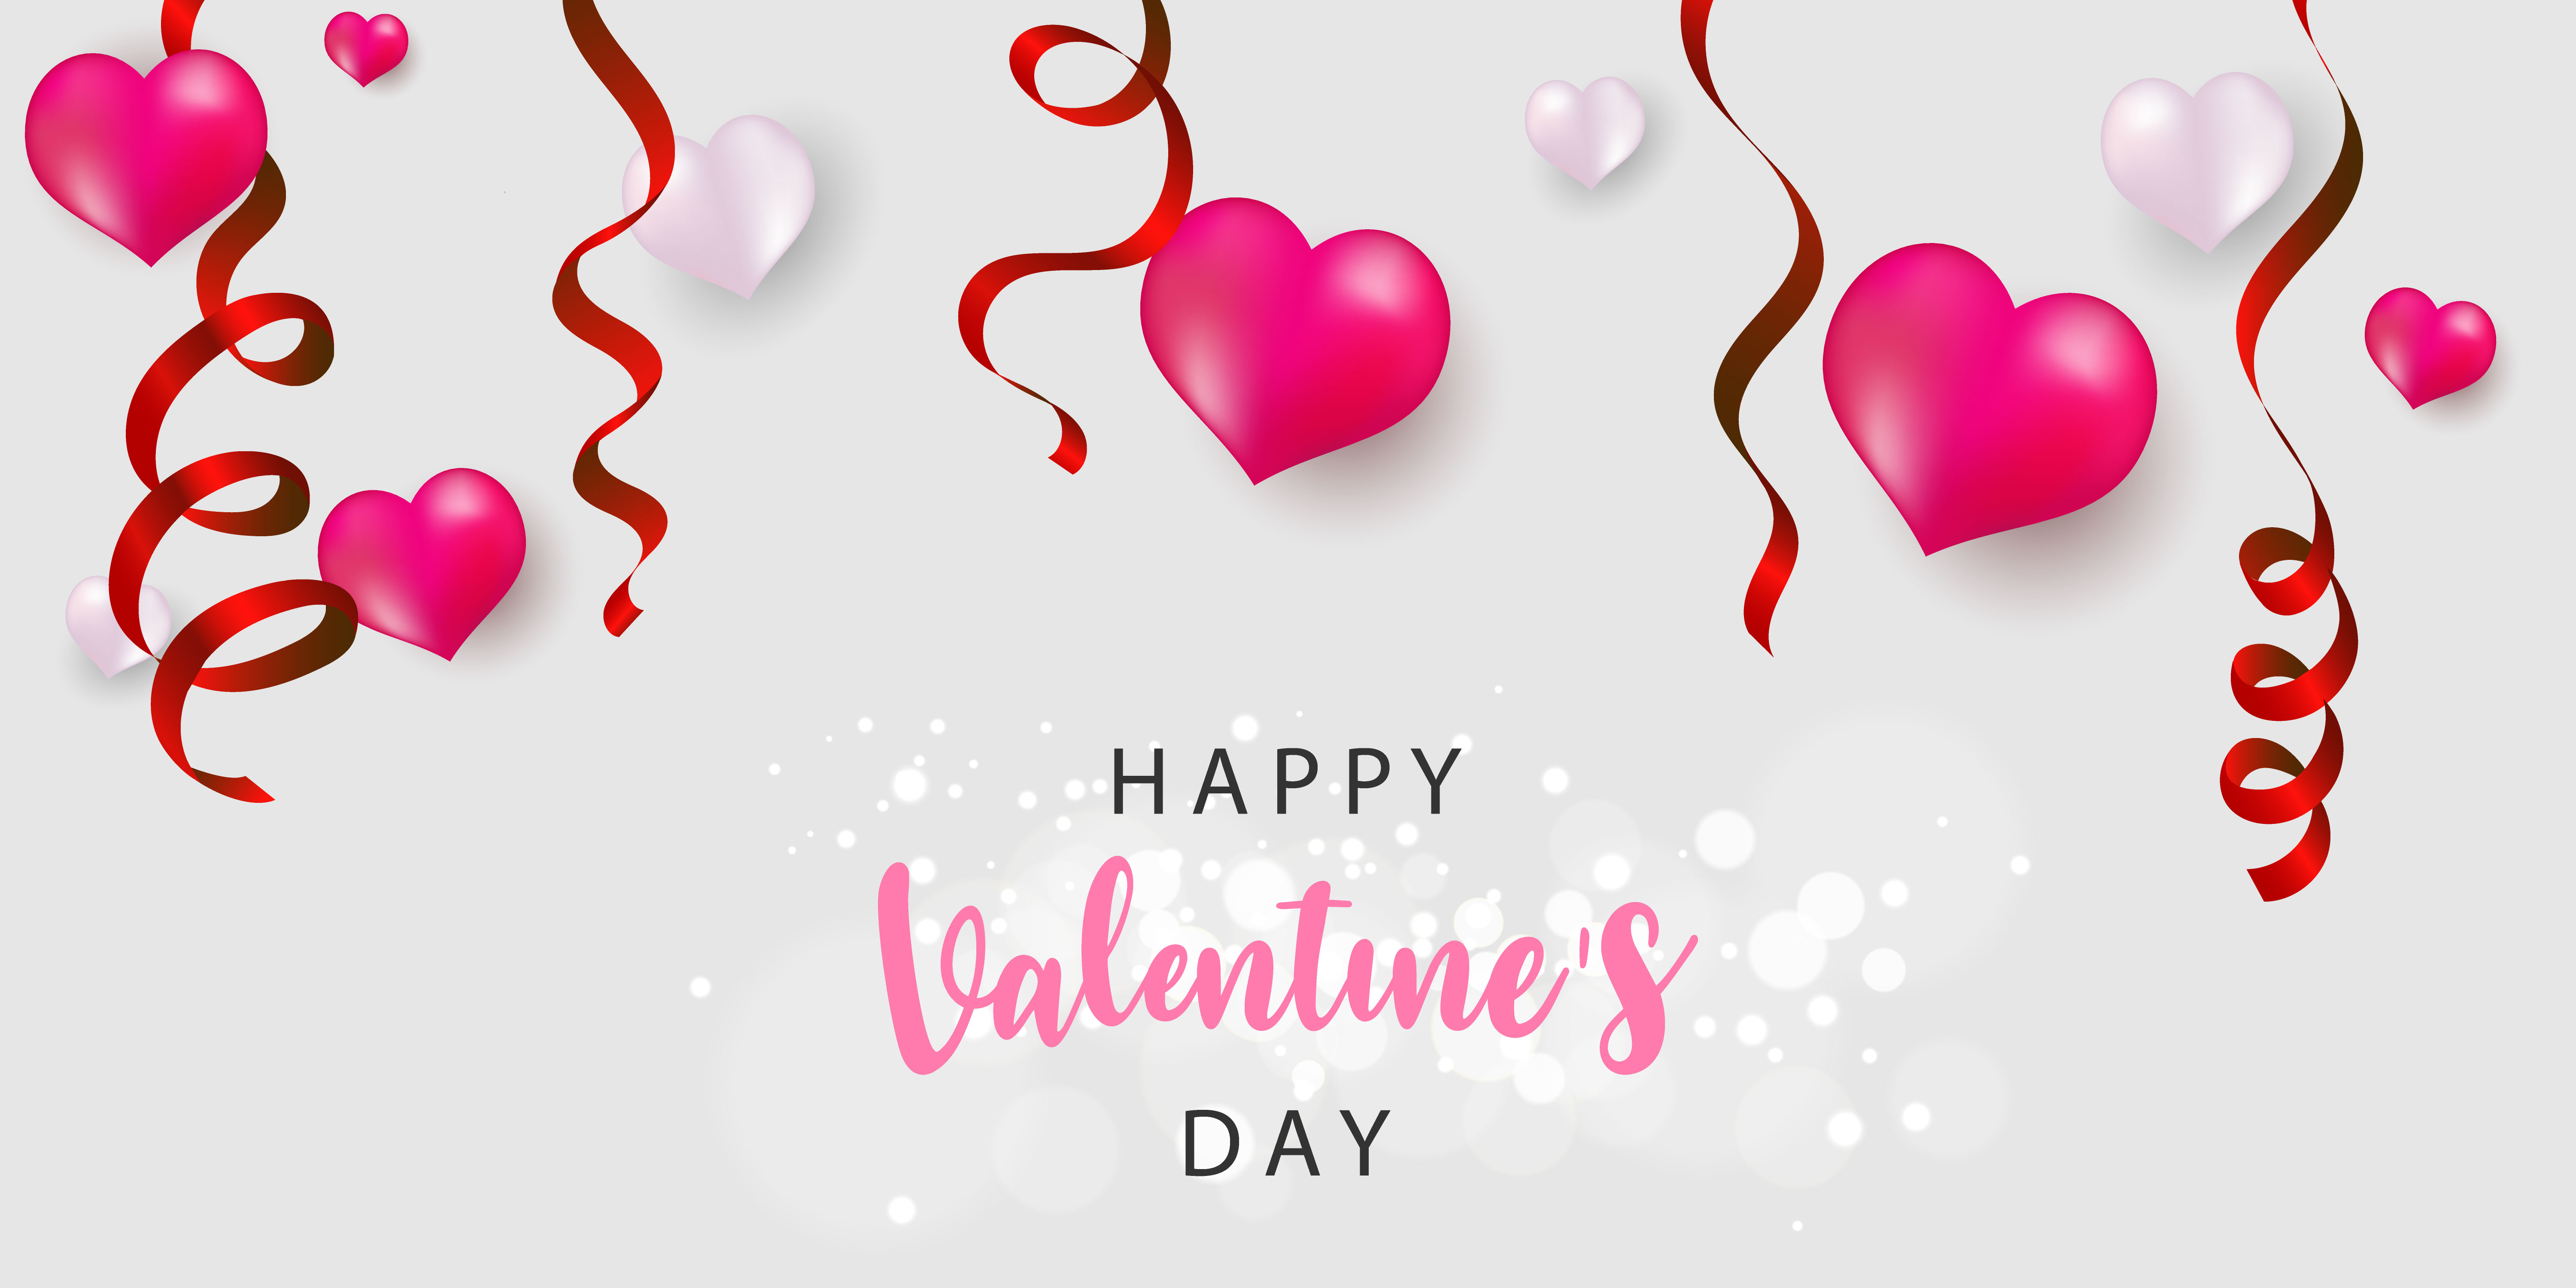 Valentine's day banner template Download Free Vectors, Clipart